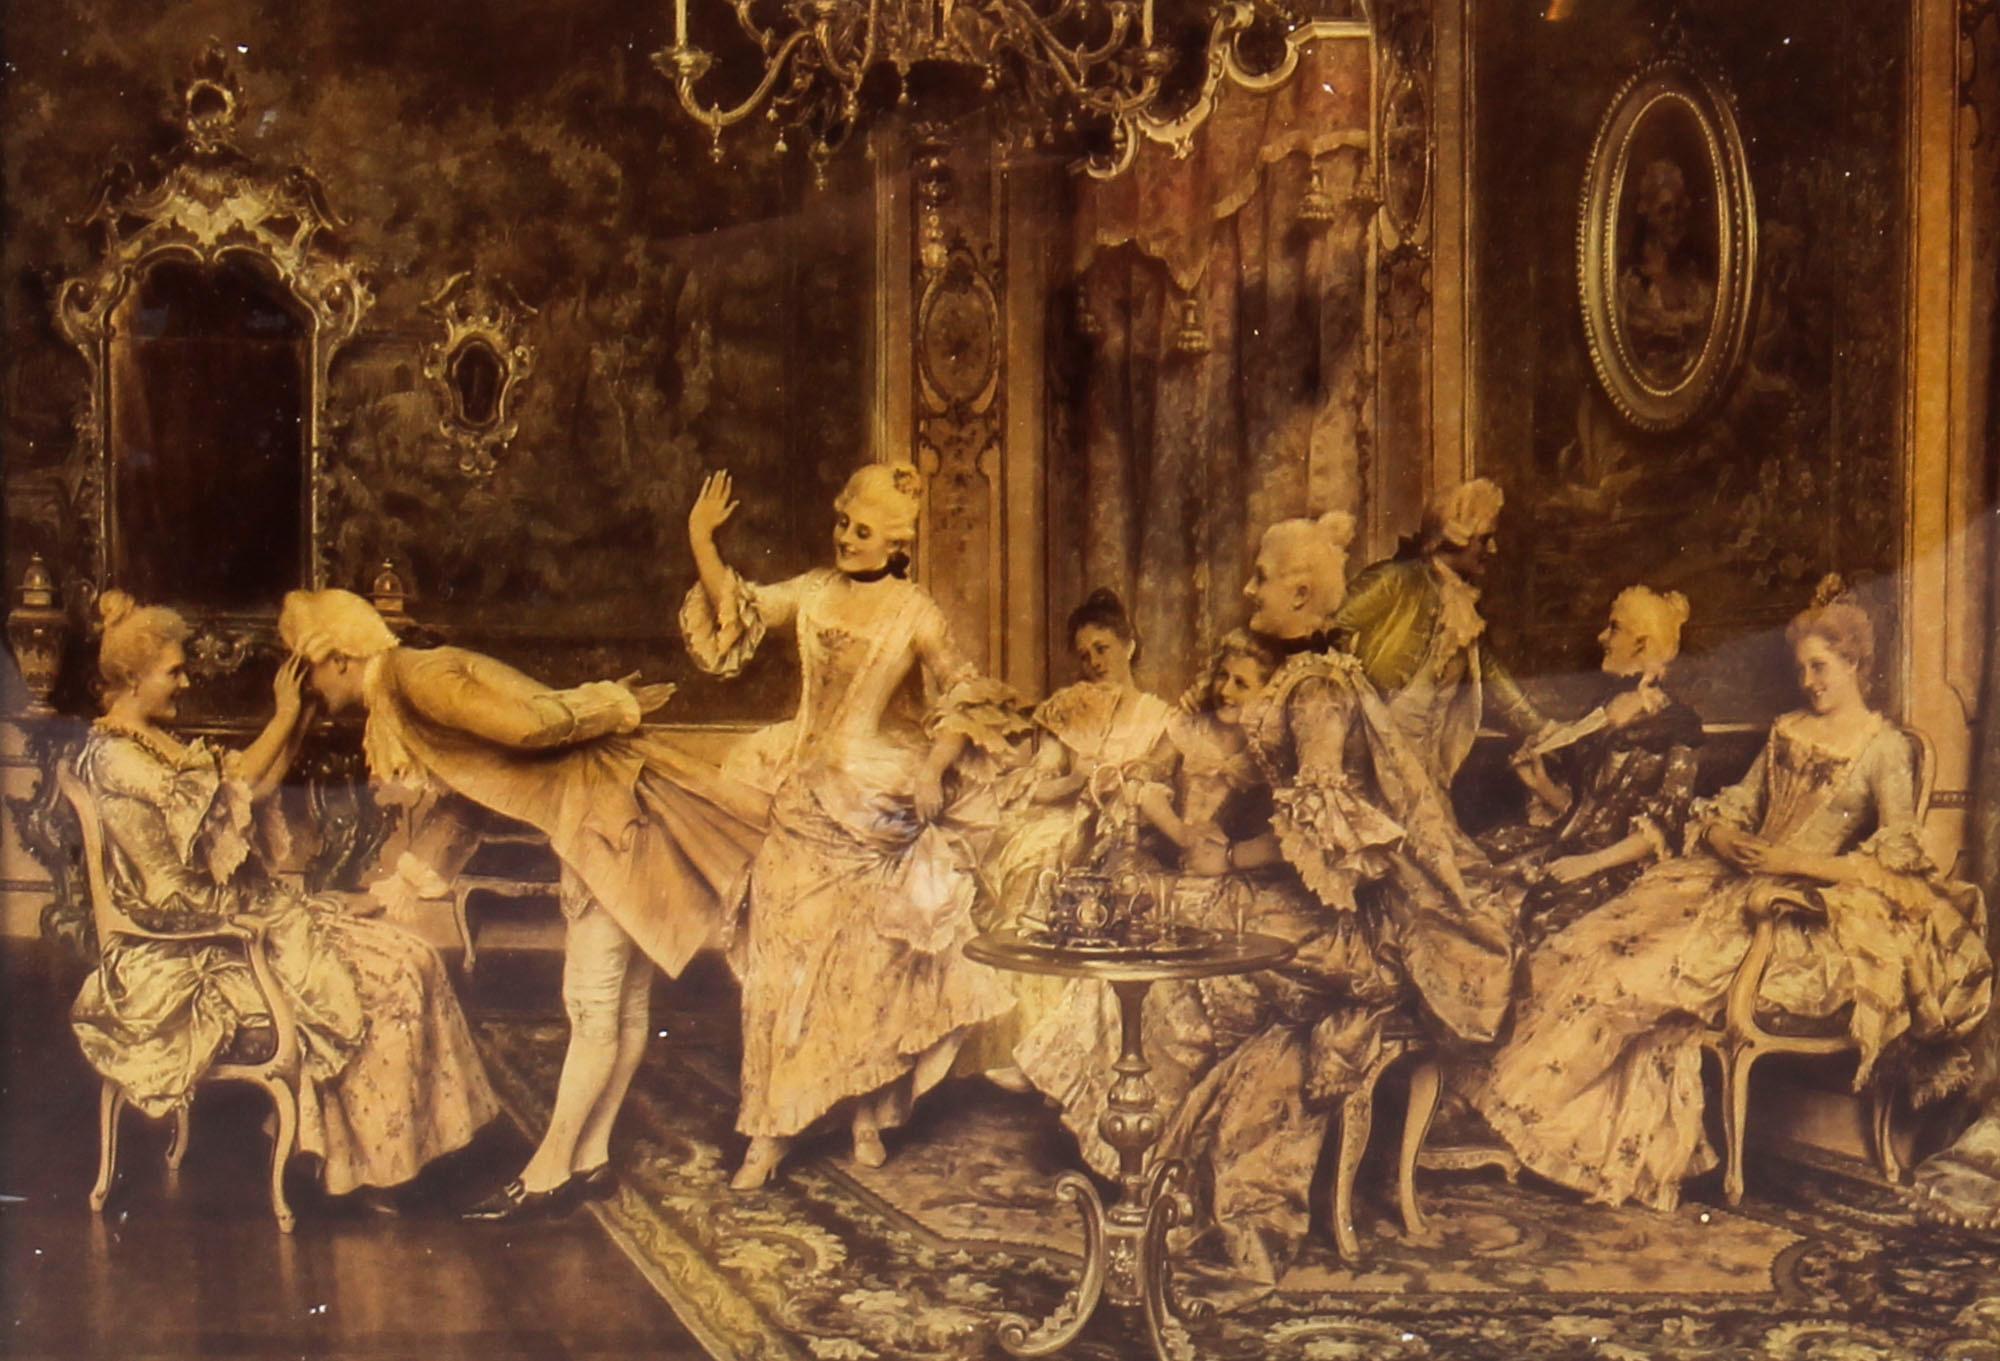 This is a charming antique Victorian crystoleum print on concave glass, circa 1890 in date.
 
It depicts a French 18th century soiree in a grande drawing-room with beautifully dressed couples enjoying each others company.
 
The picture features its